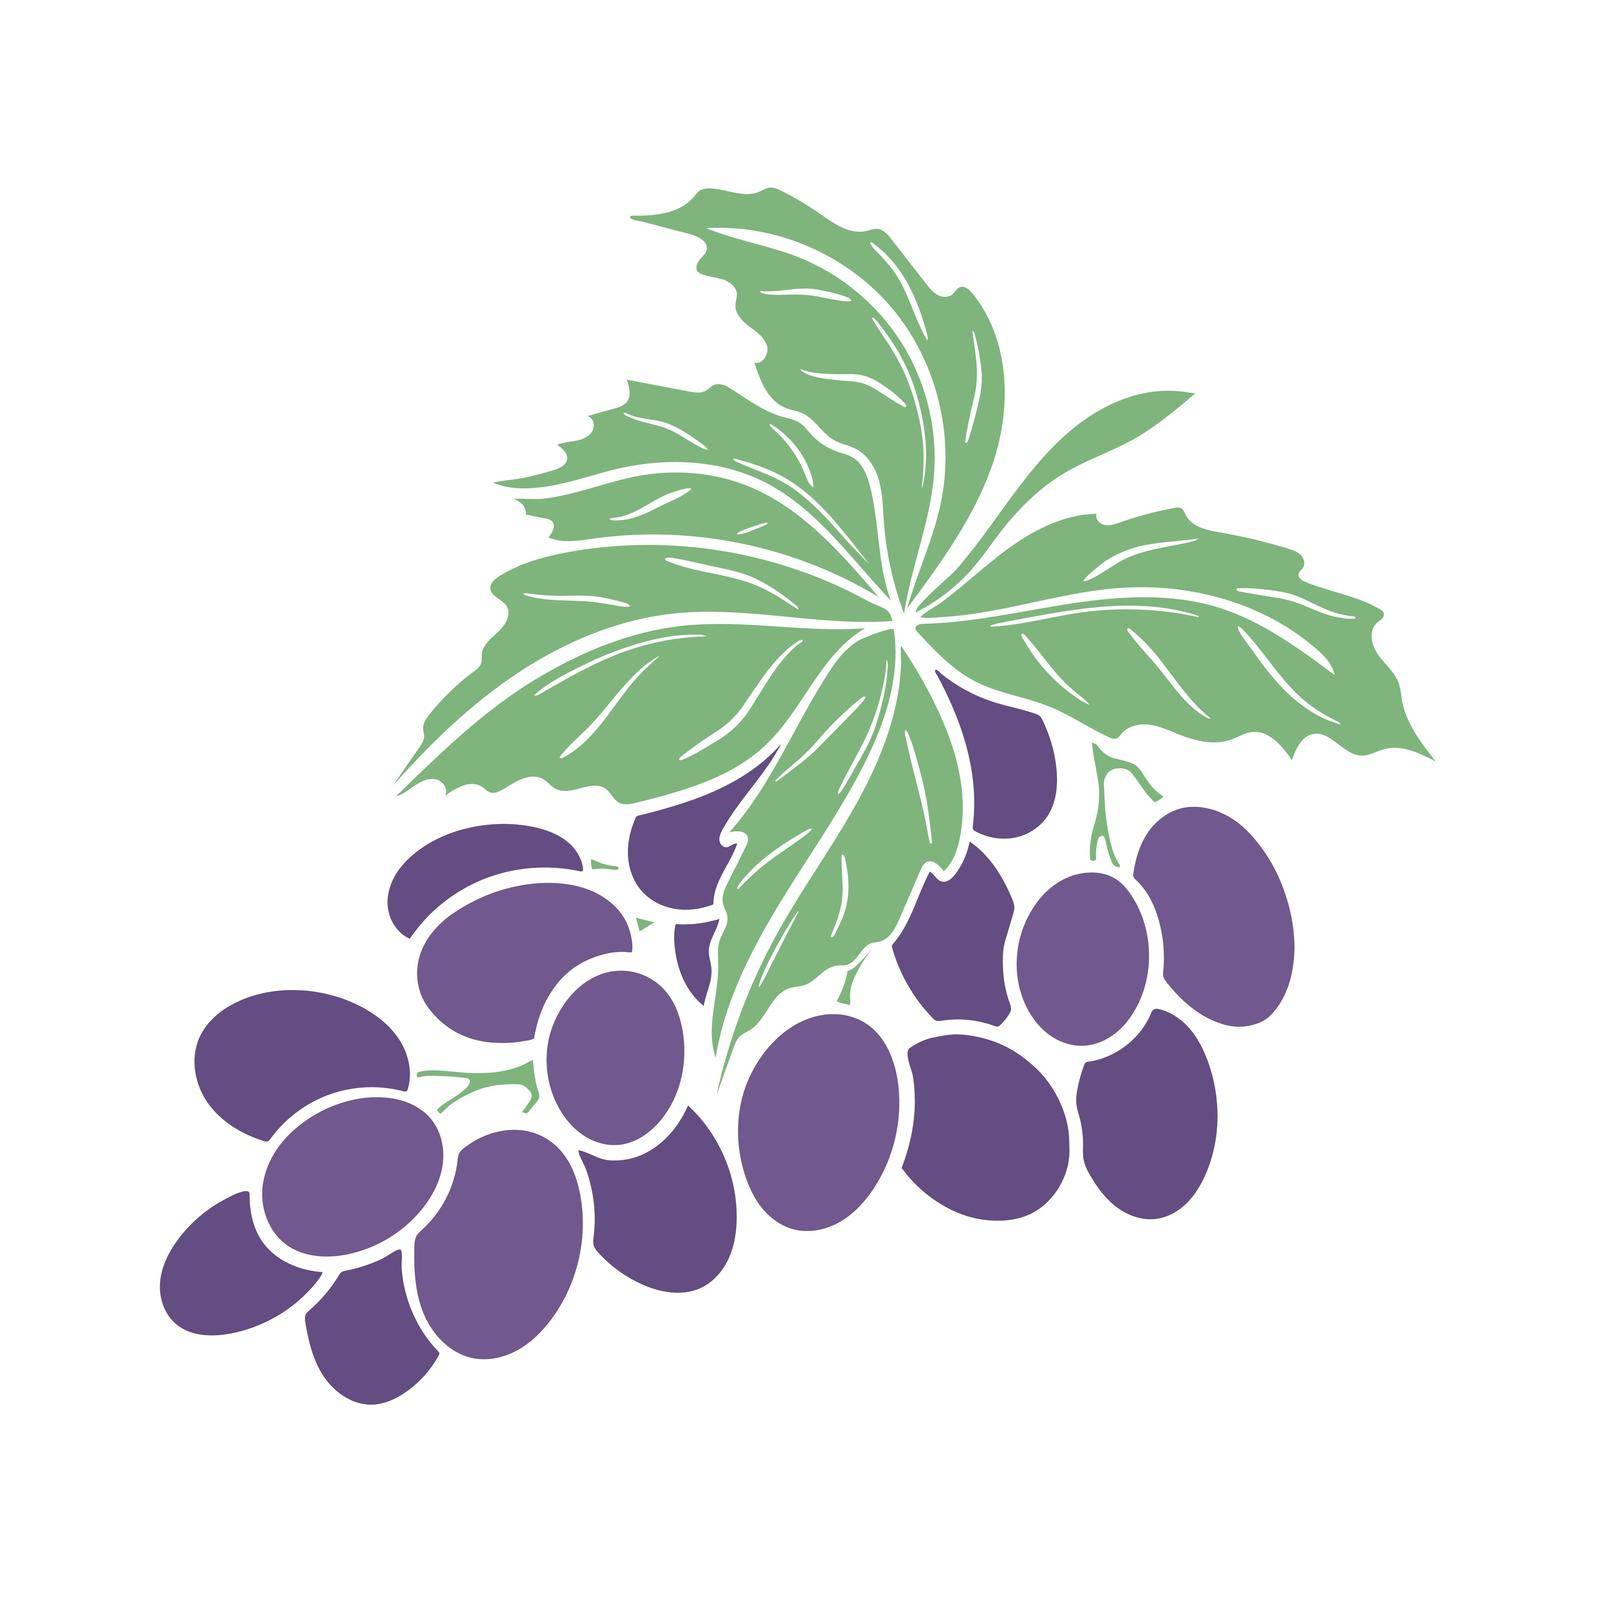 Grapes branch isolated vector illustration by TassiaK